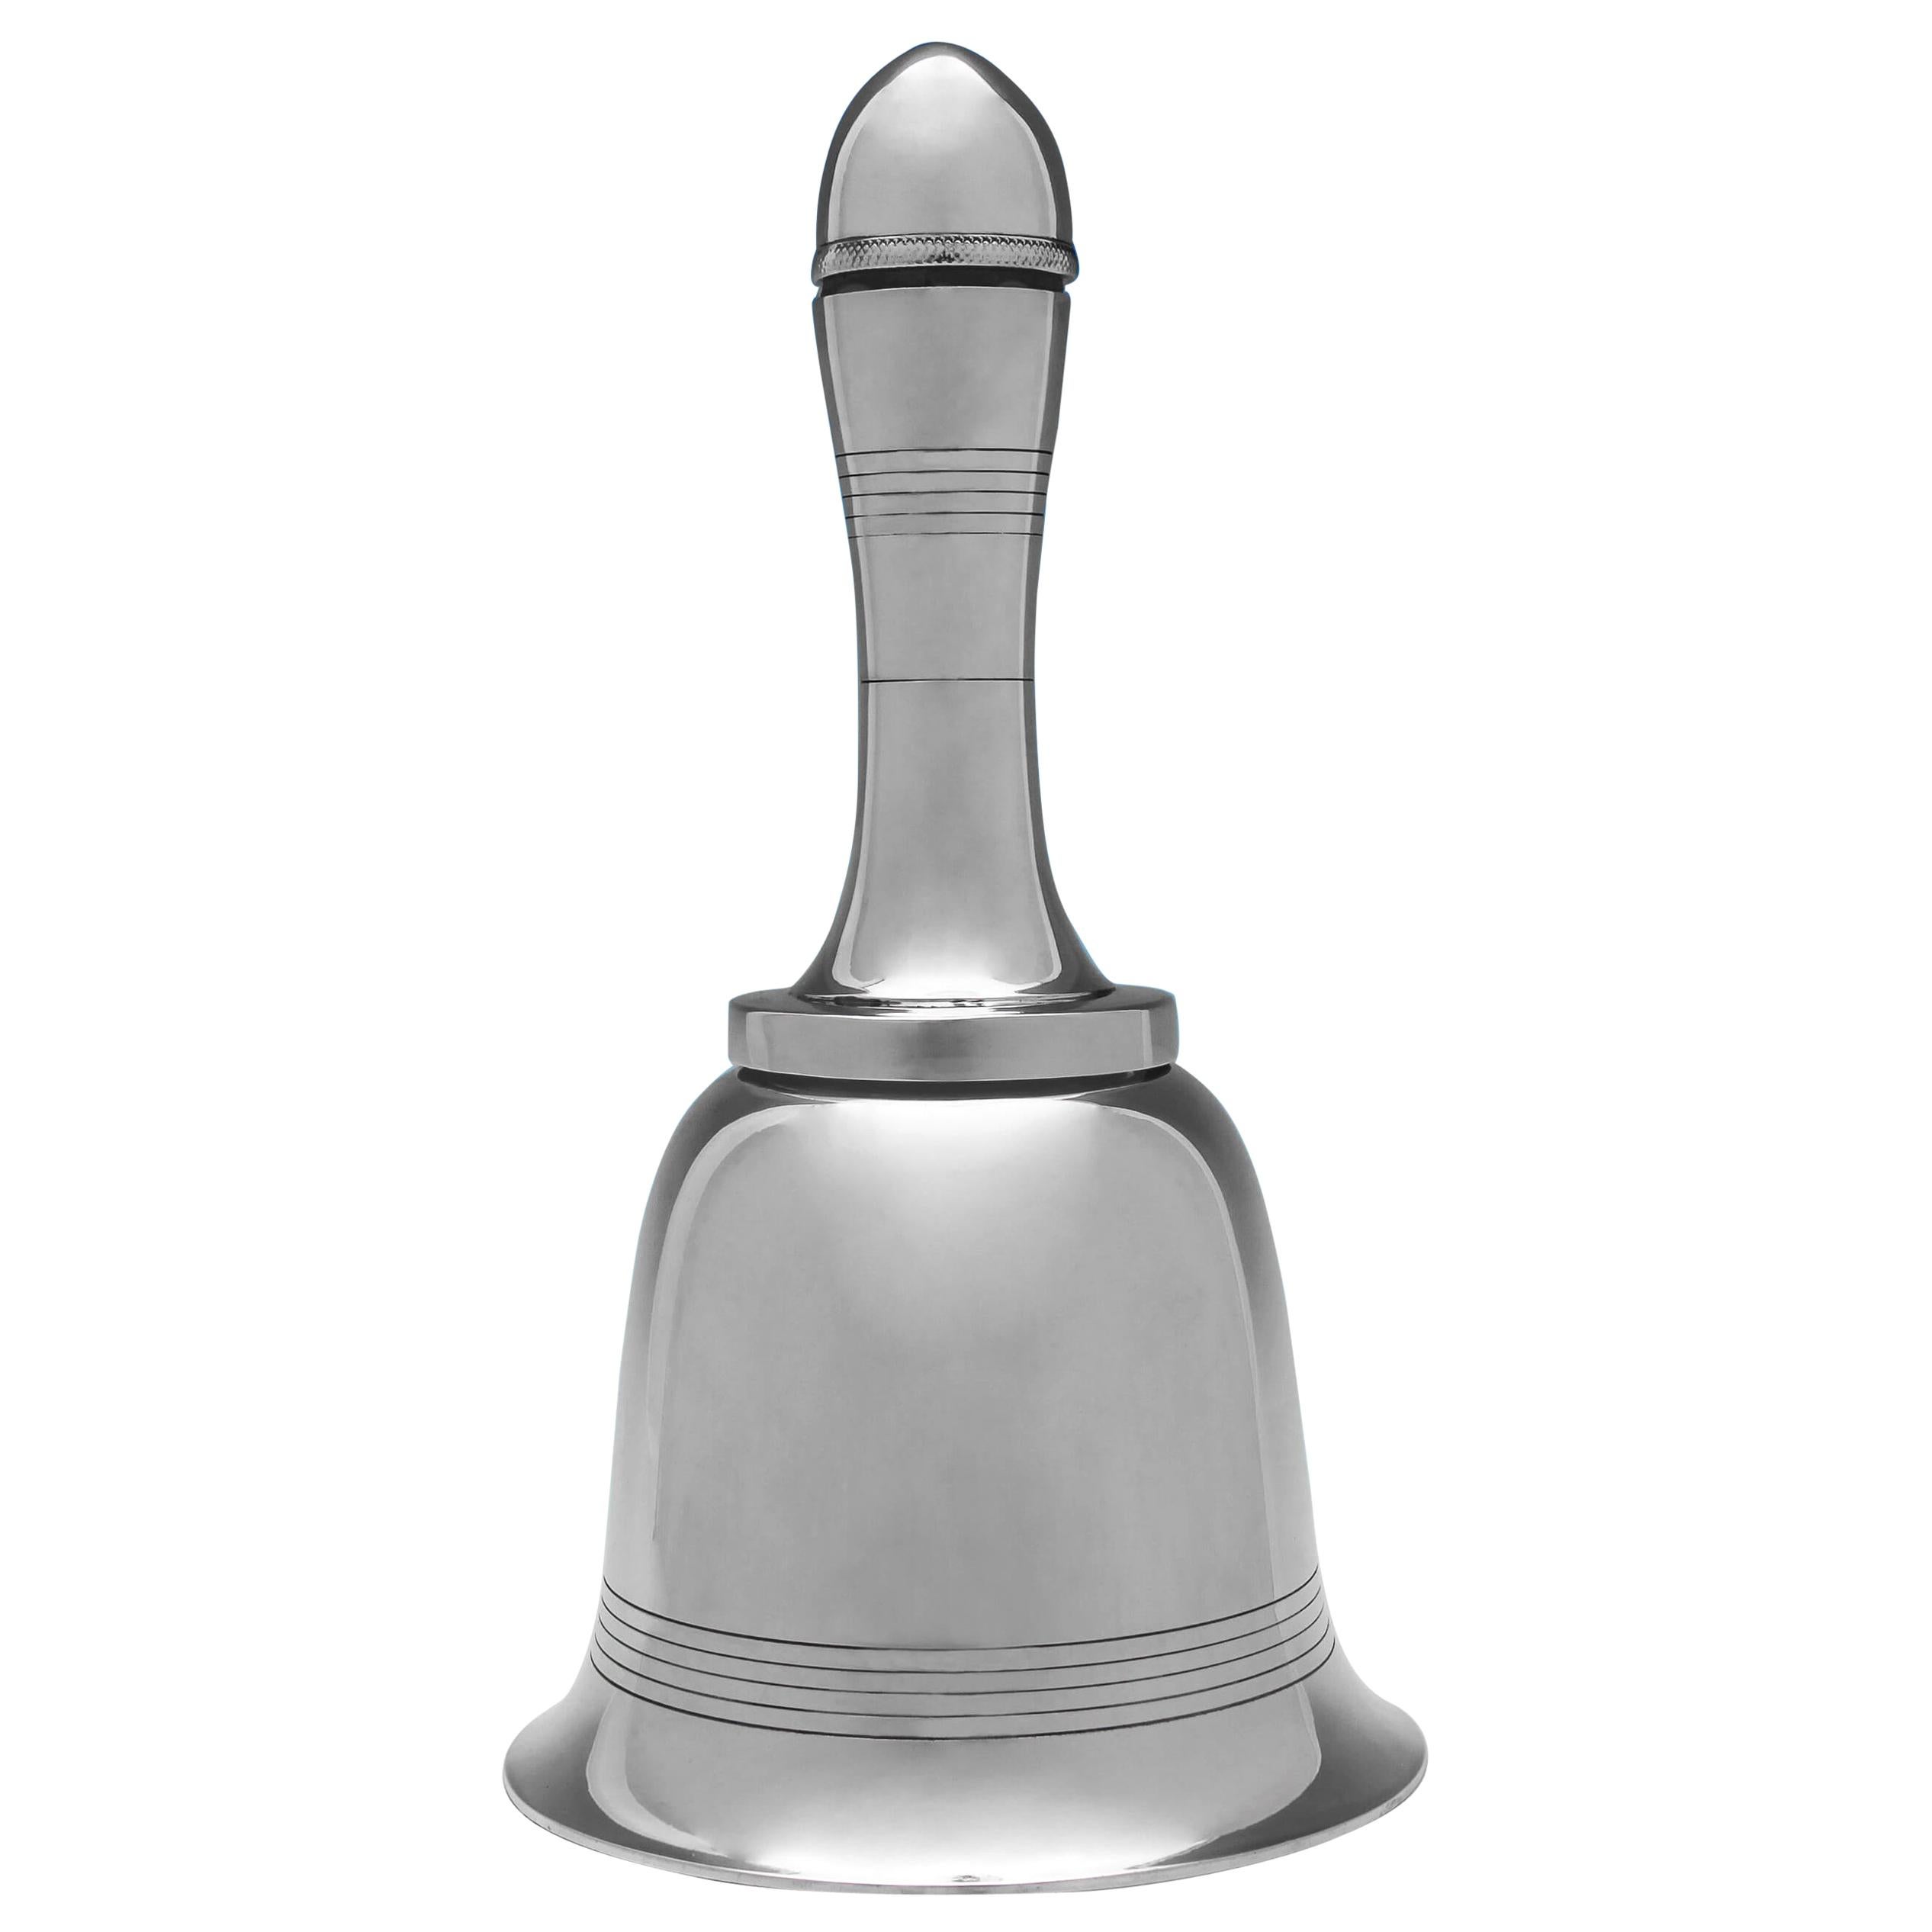 Dunhill Art Deco Silver Plated Novelty Bell Design Cocktail Shaker